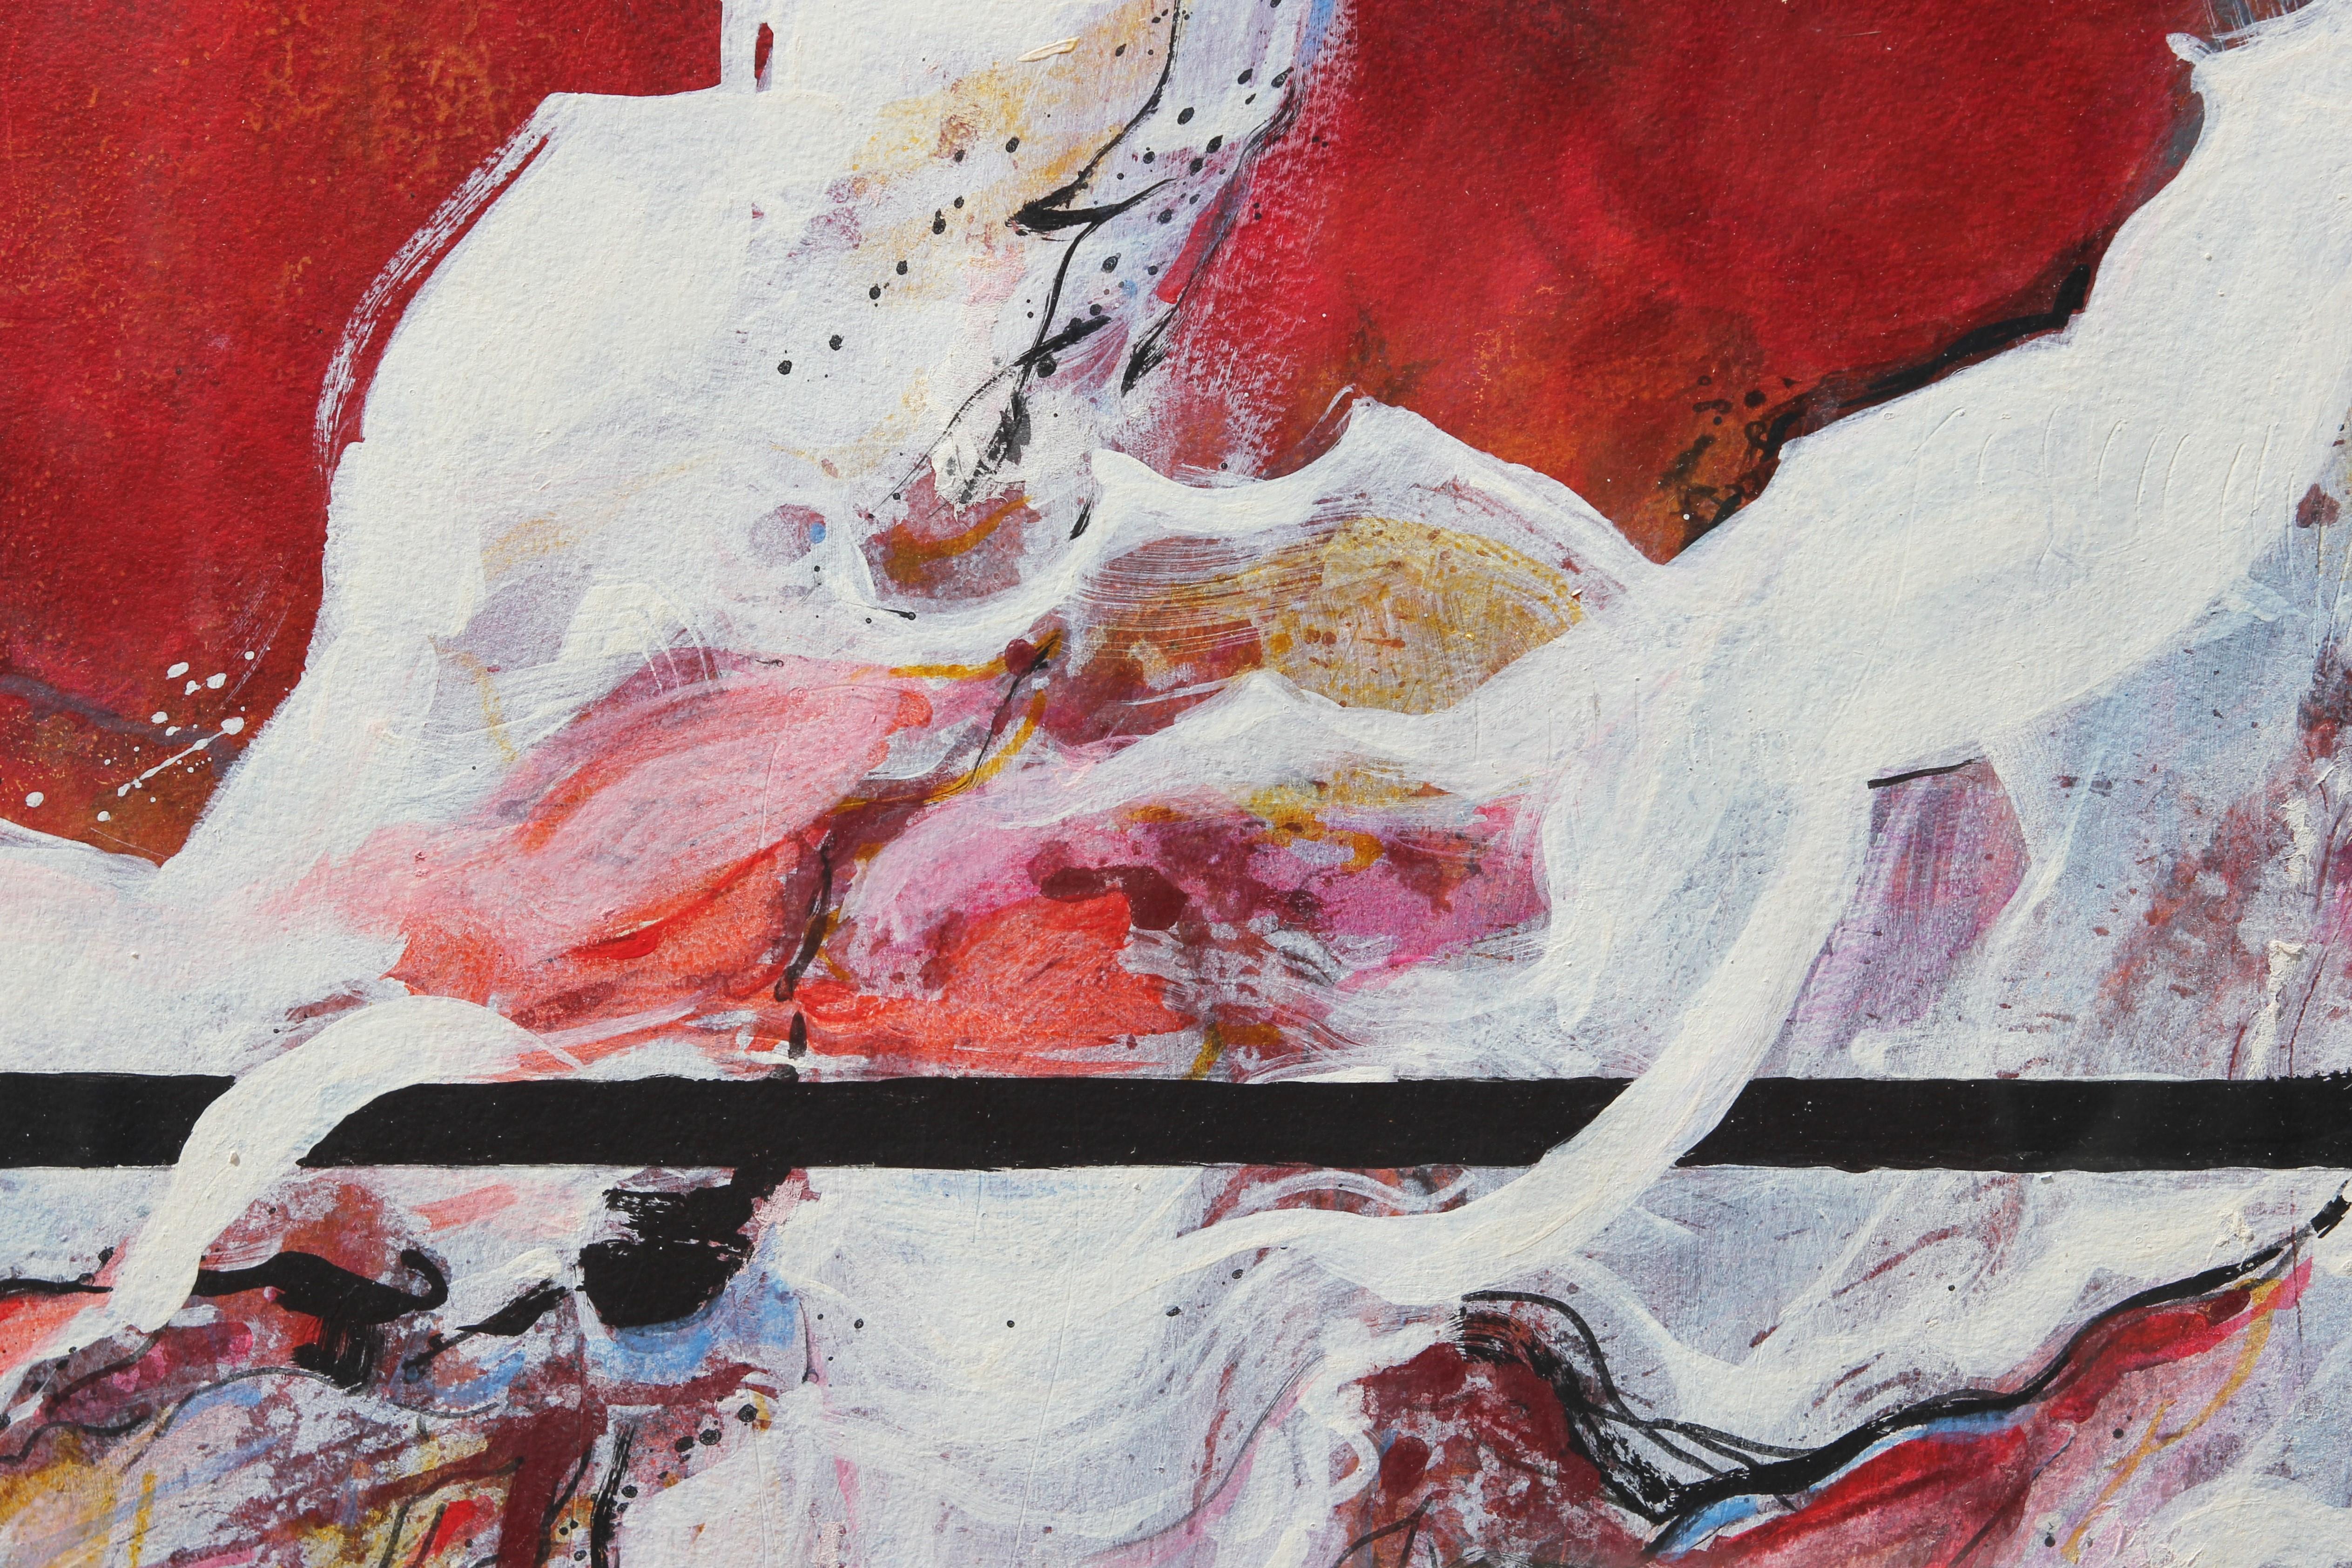 Modern red and white abstract expressionist mixed media painting by Texas artist Carole Myers. The work features expressive strokes of white against a red background. The piece is signed in the front lower right corner. Currently hung in a light